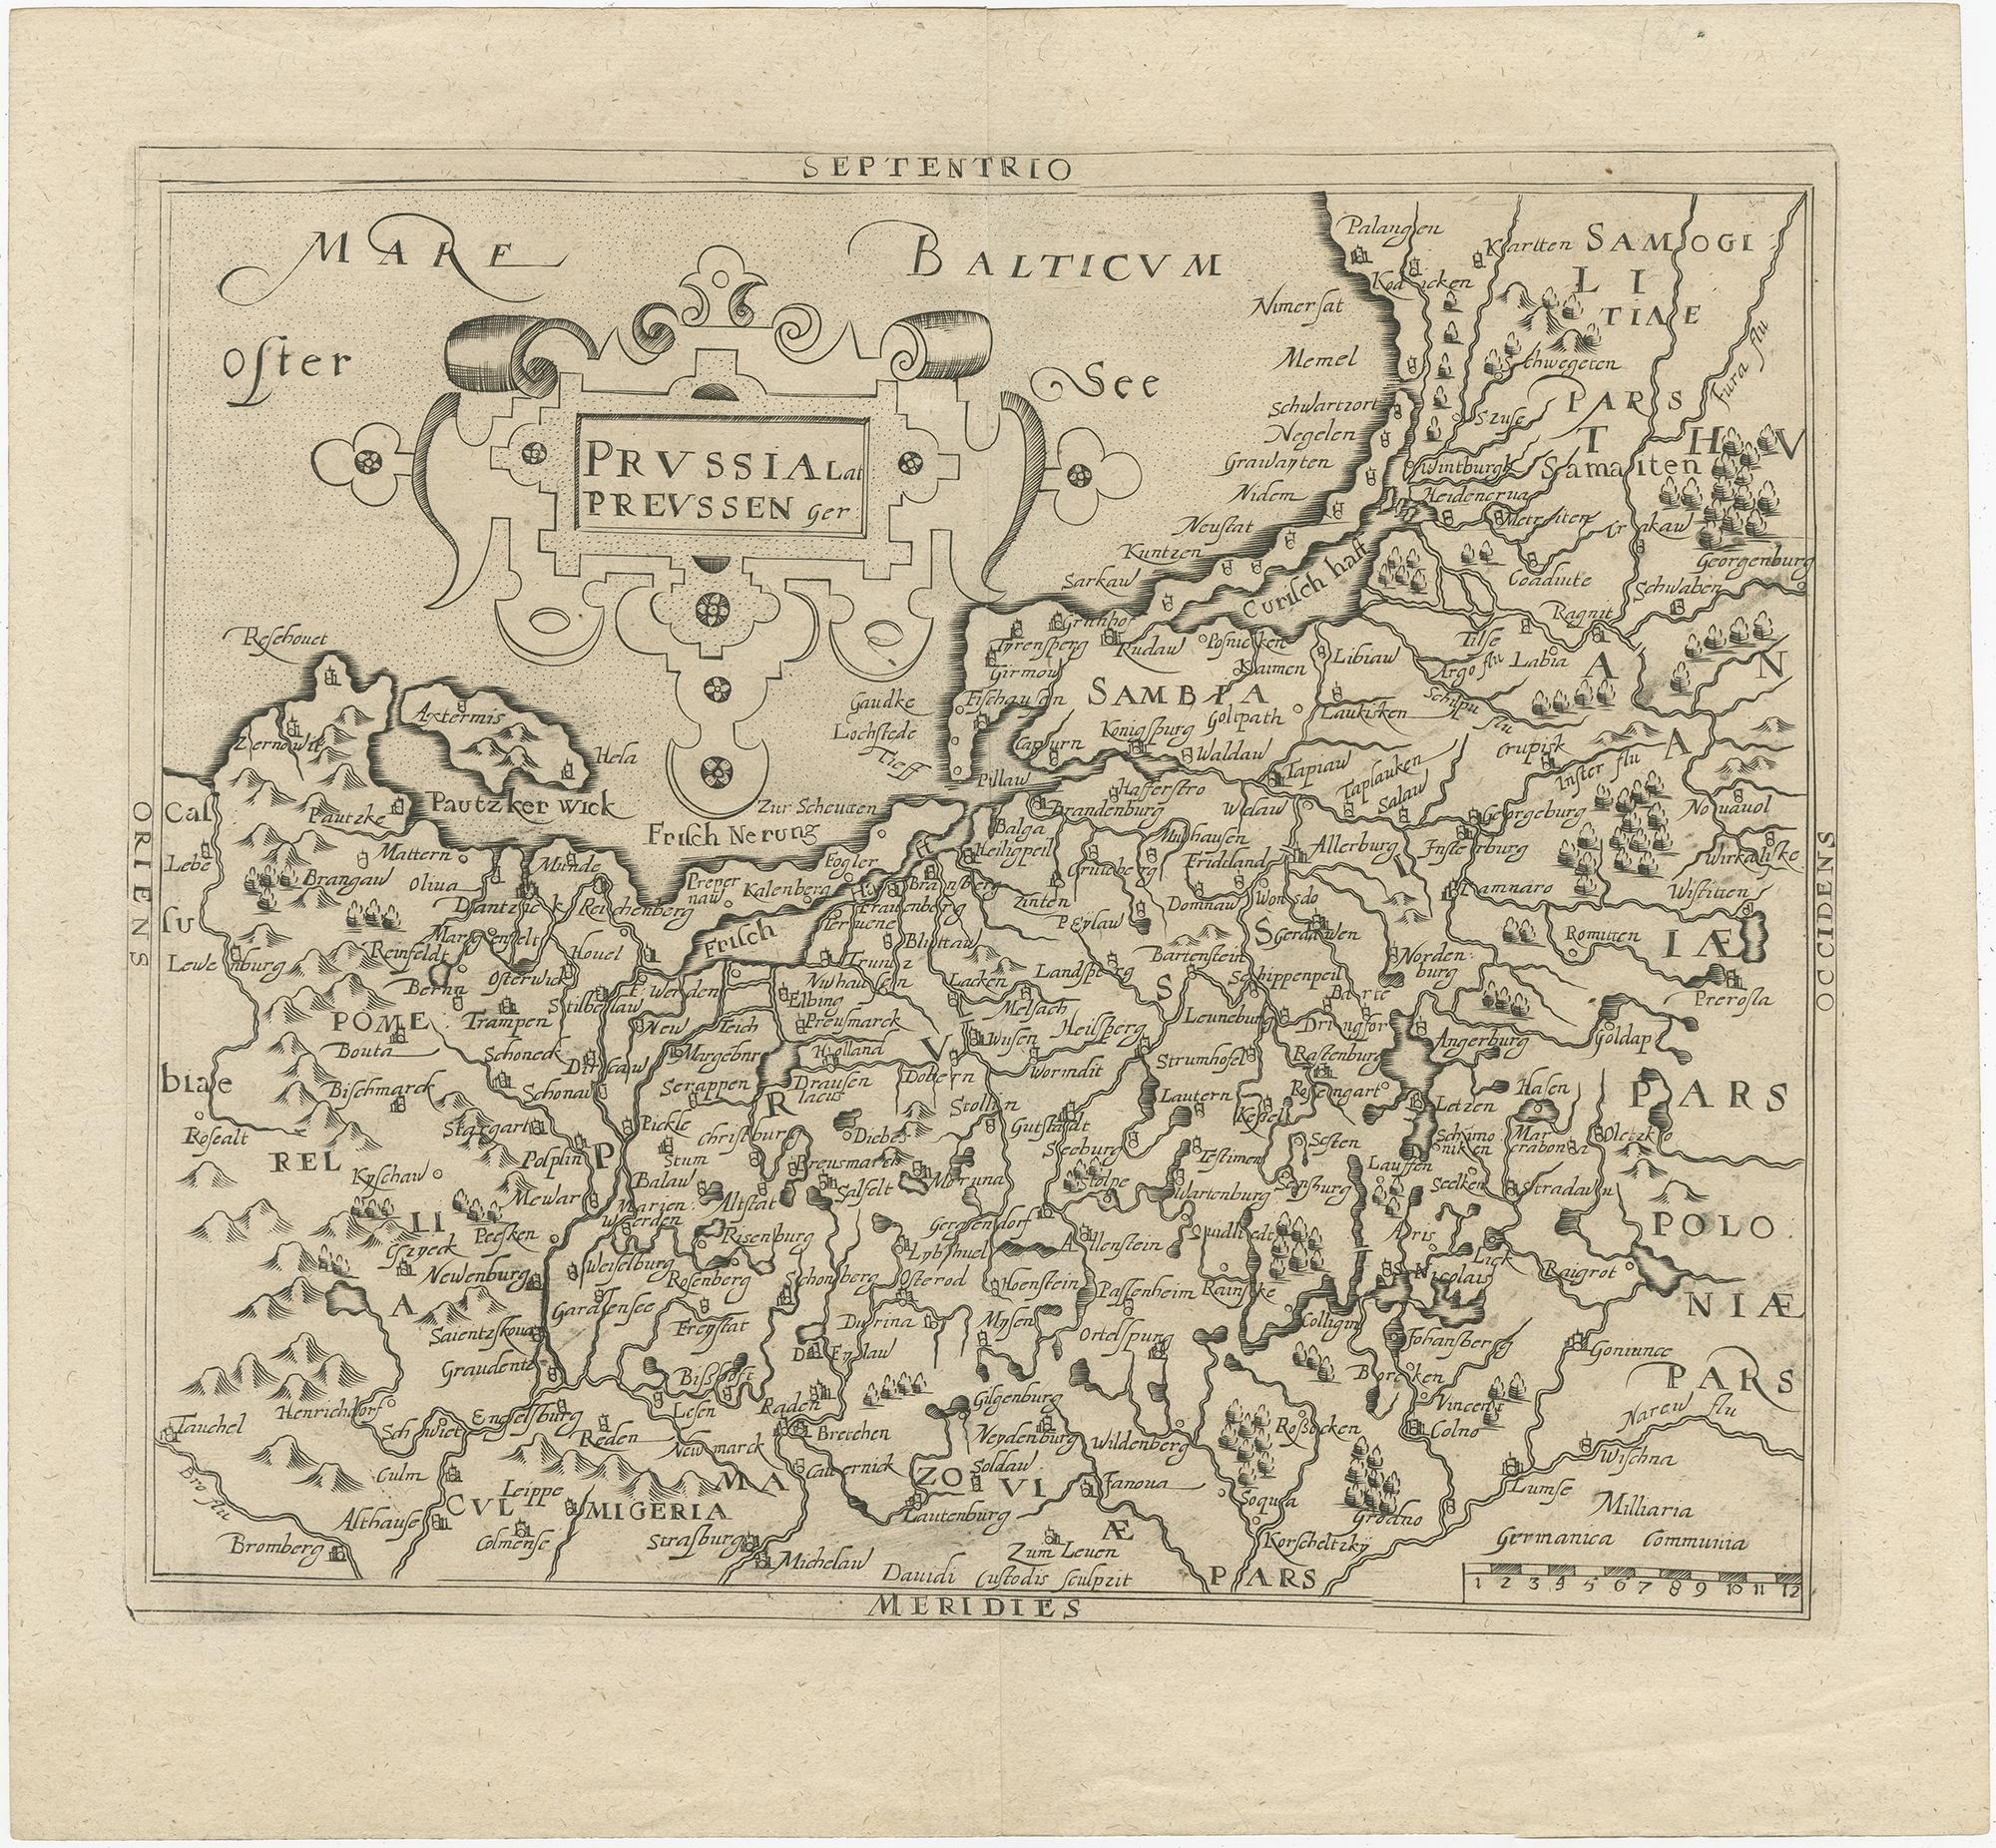 Antique map titled 'Prussia - Preussen'. Original map of Prussia, a historically prominent German state that originated in 1525 with a duchy centered on the region of Prussia on the southeast coast of the Baltic Sea. Source unknown, to be